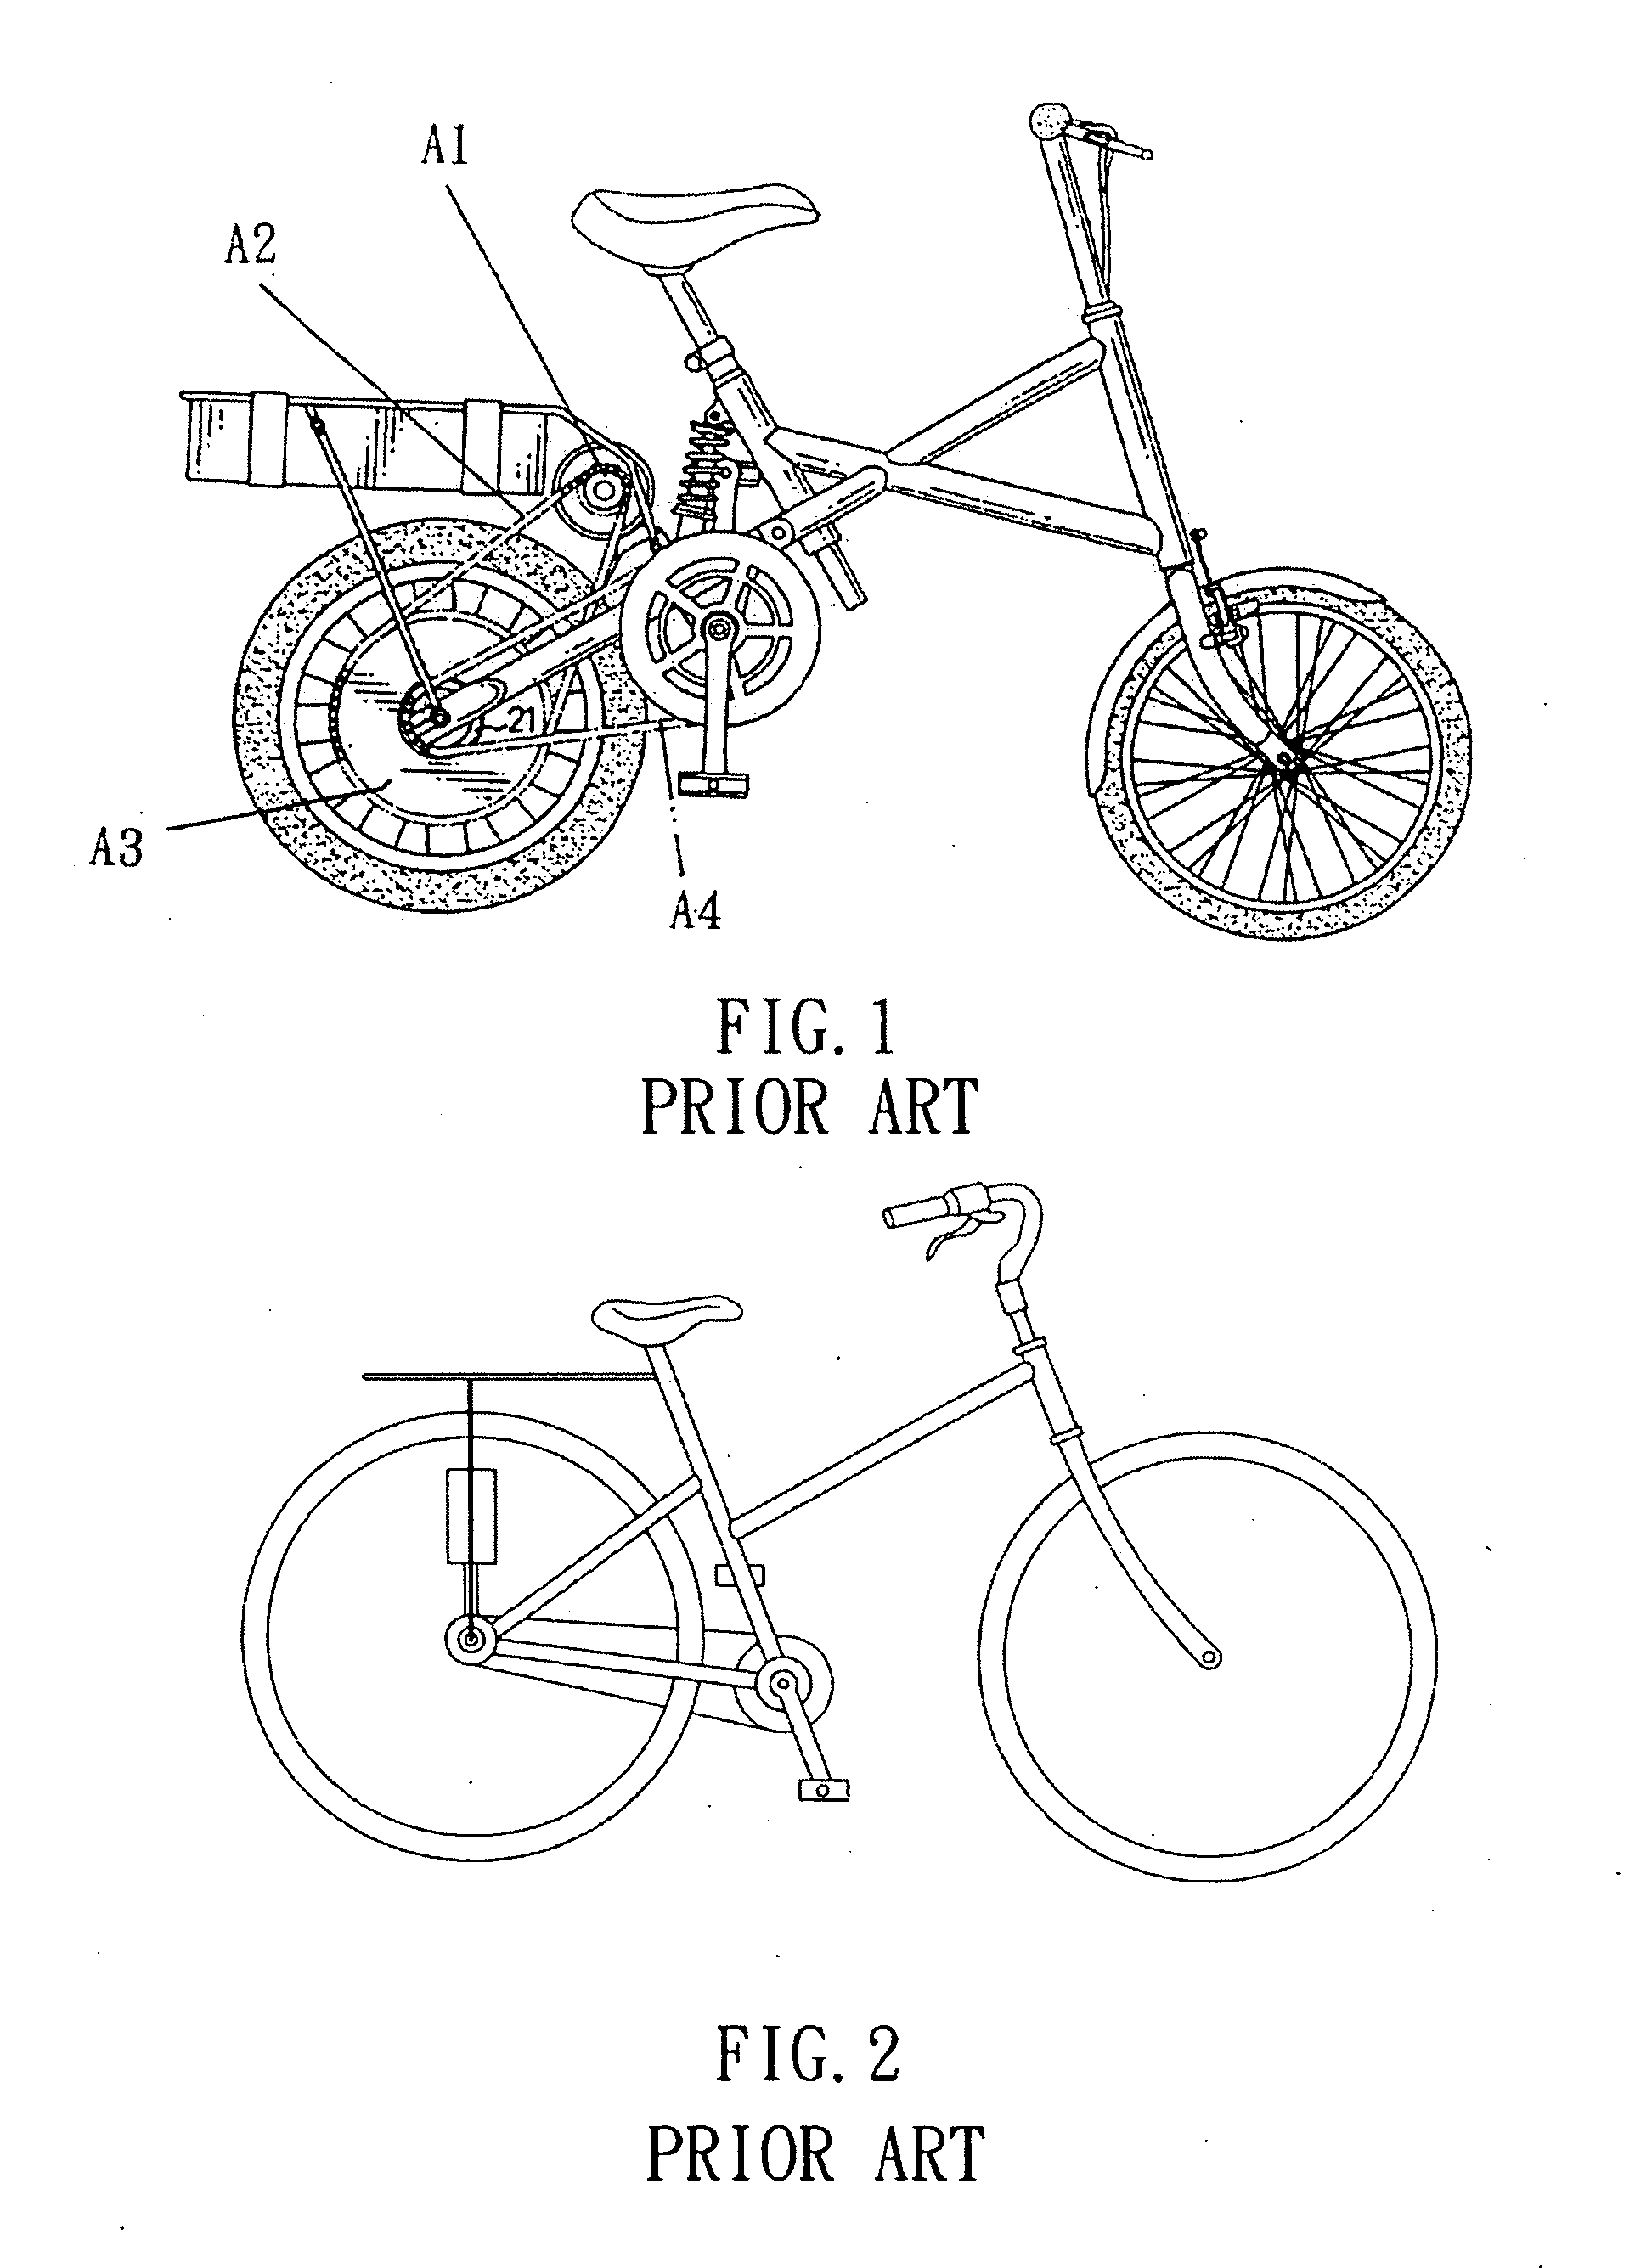 Driving mechanism for the motorized bicycle